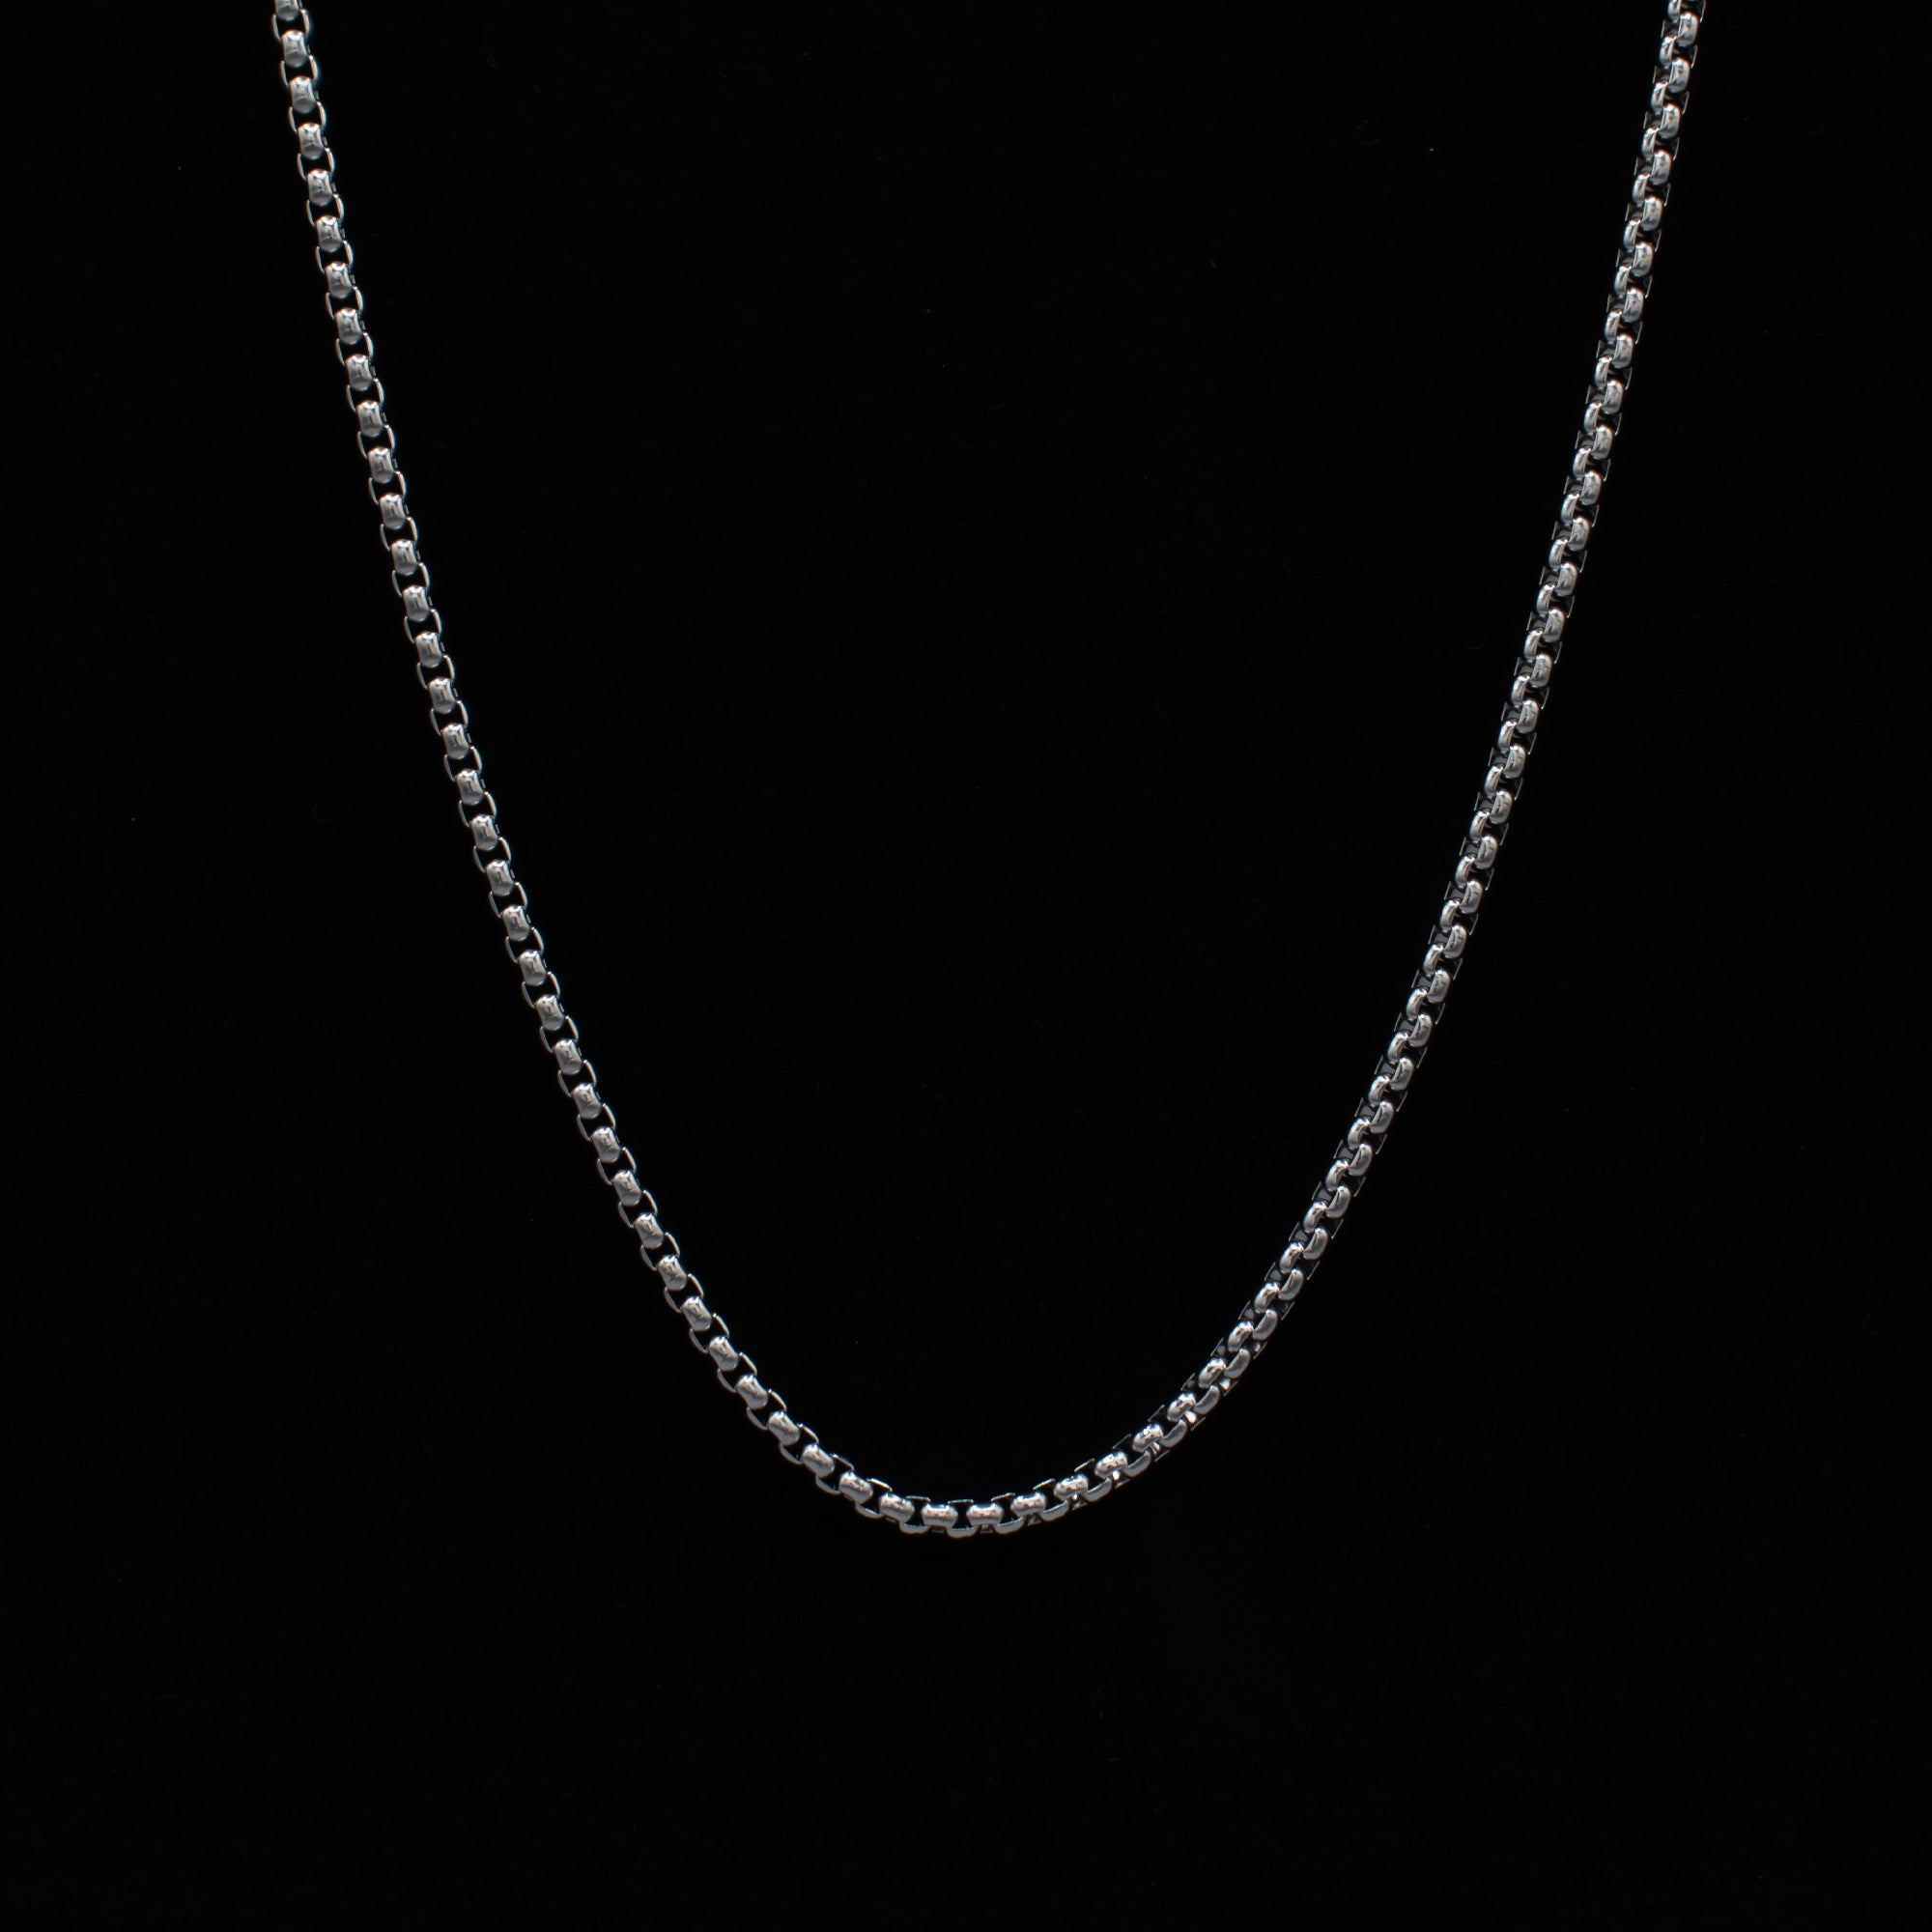 Silver Round Box Chain Necklace - 4mm